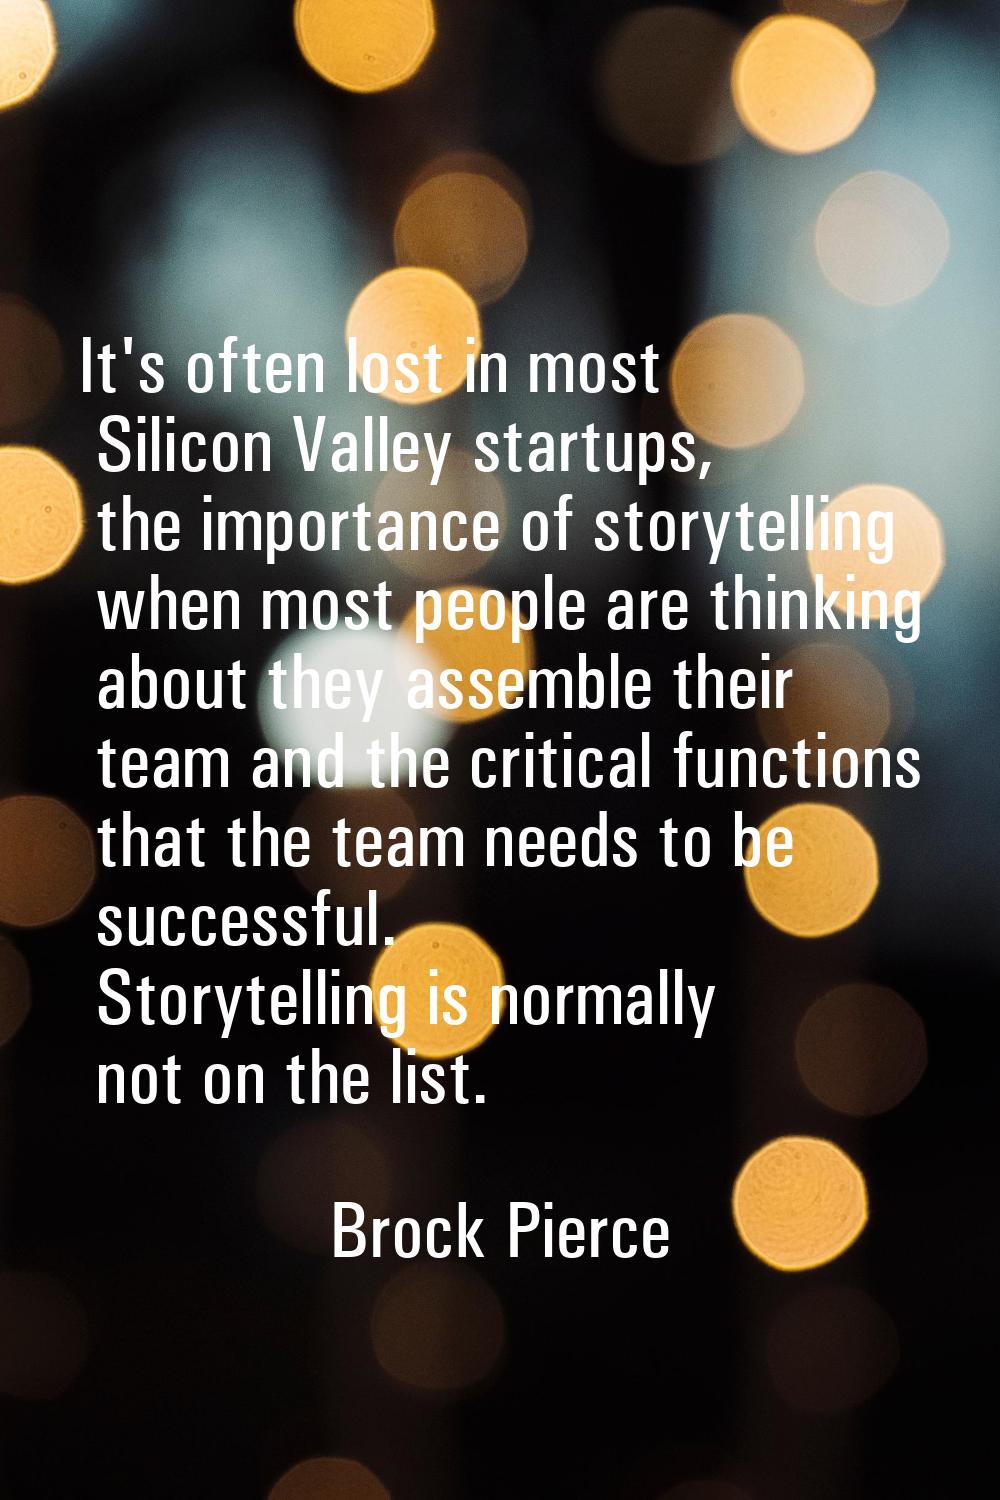 It's often lost in most Silicon Valley startups, the importance of storytelling when most people ar